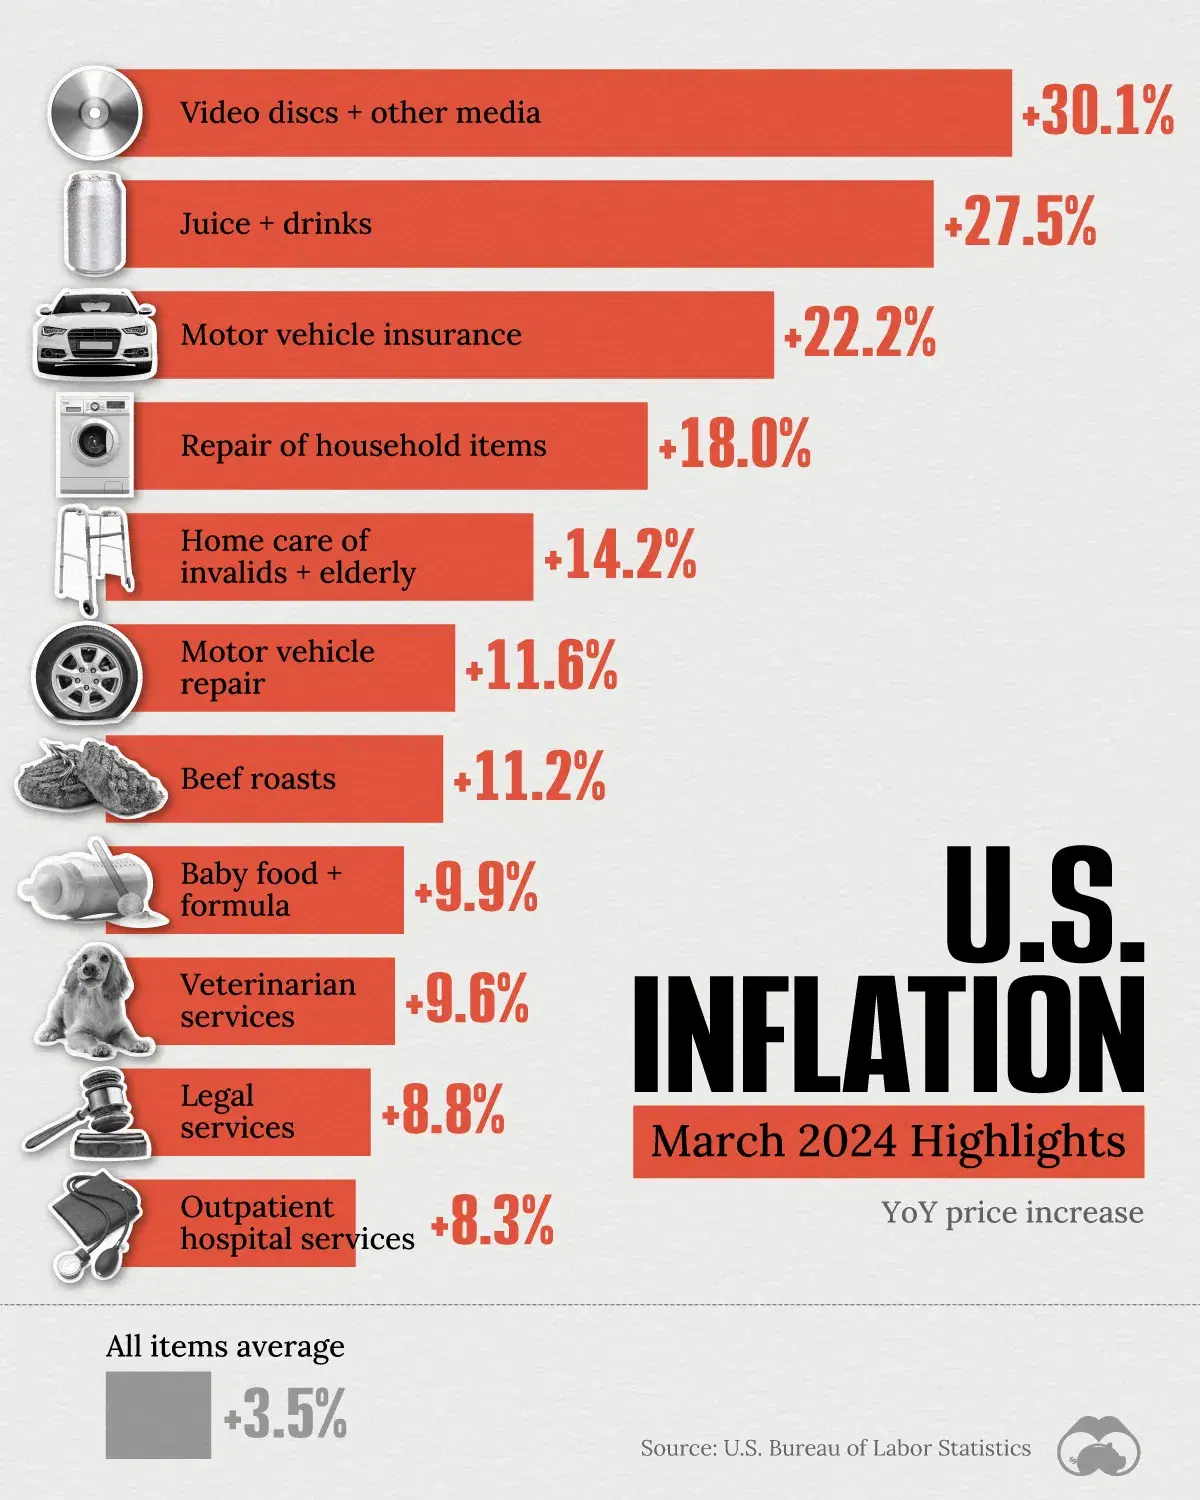 Where U.S. Inflation Hit the Hardest (March 2024) 🇺🇸